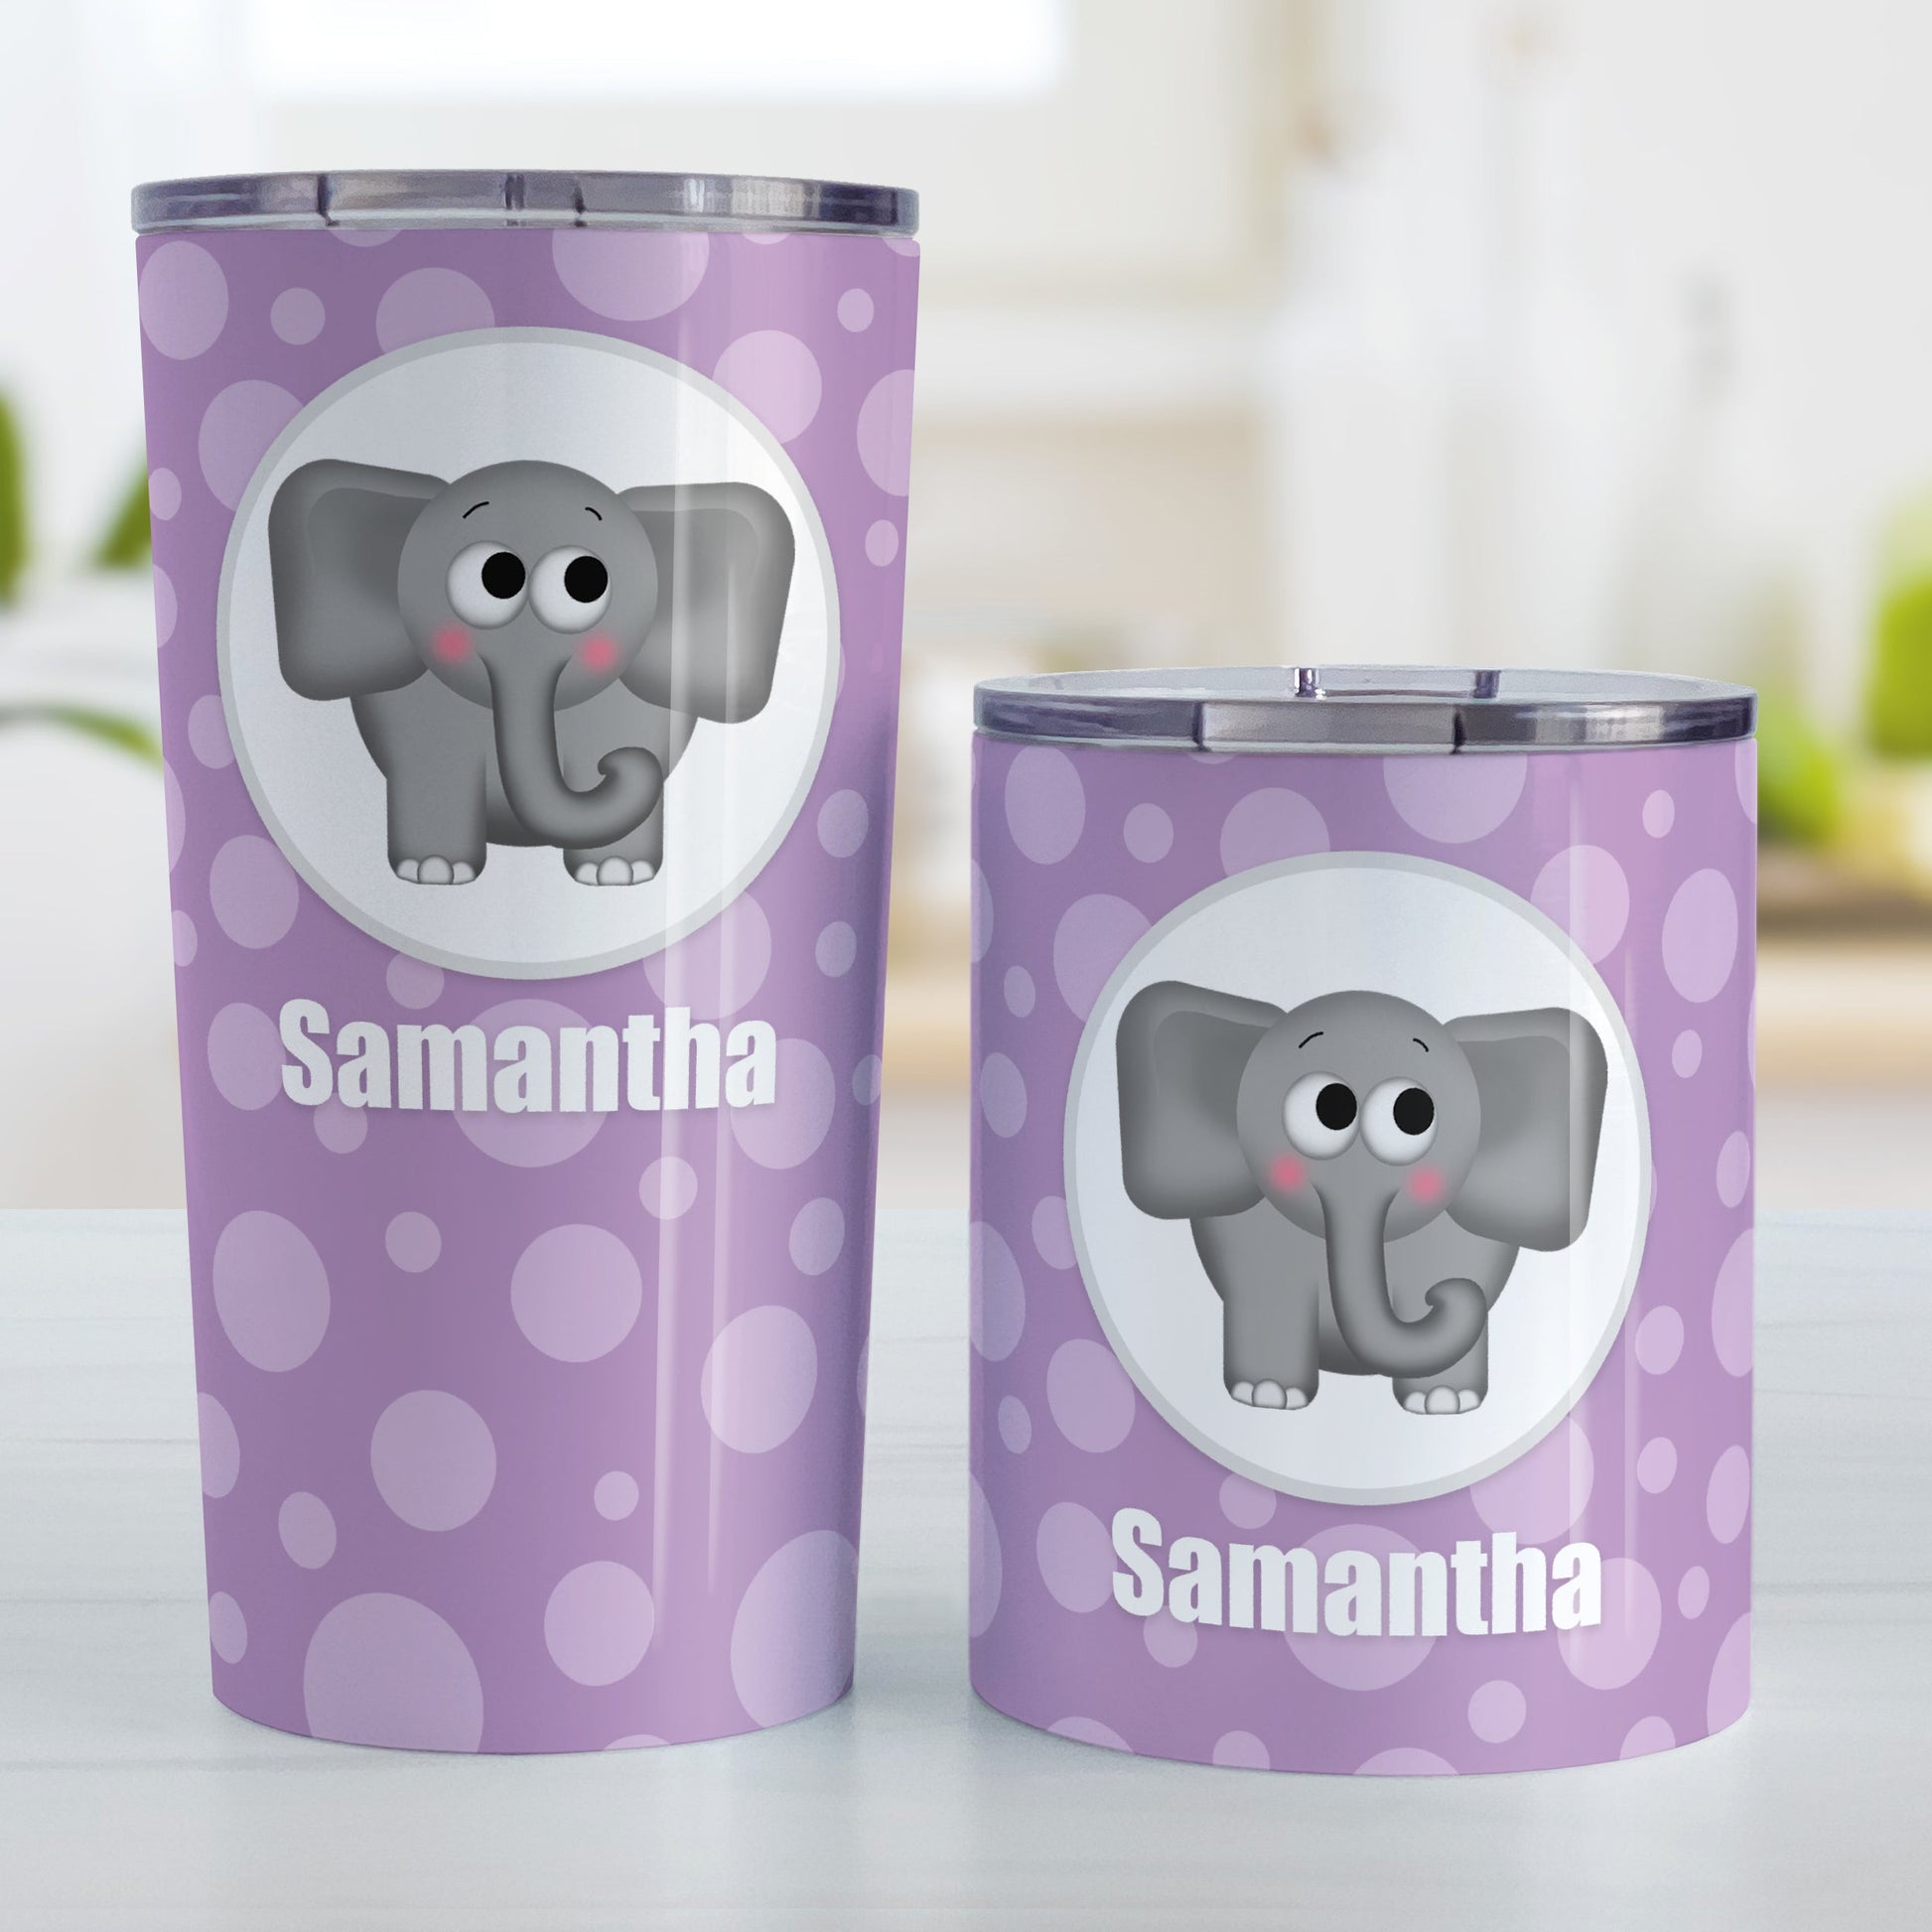 Cute Elephant Bubbly Purple Personalized Tumbler Cup (20oz and 10oz, stainless steel insulated) at Amy's Coffee Mugs